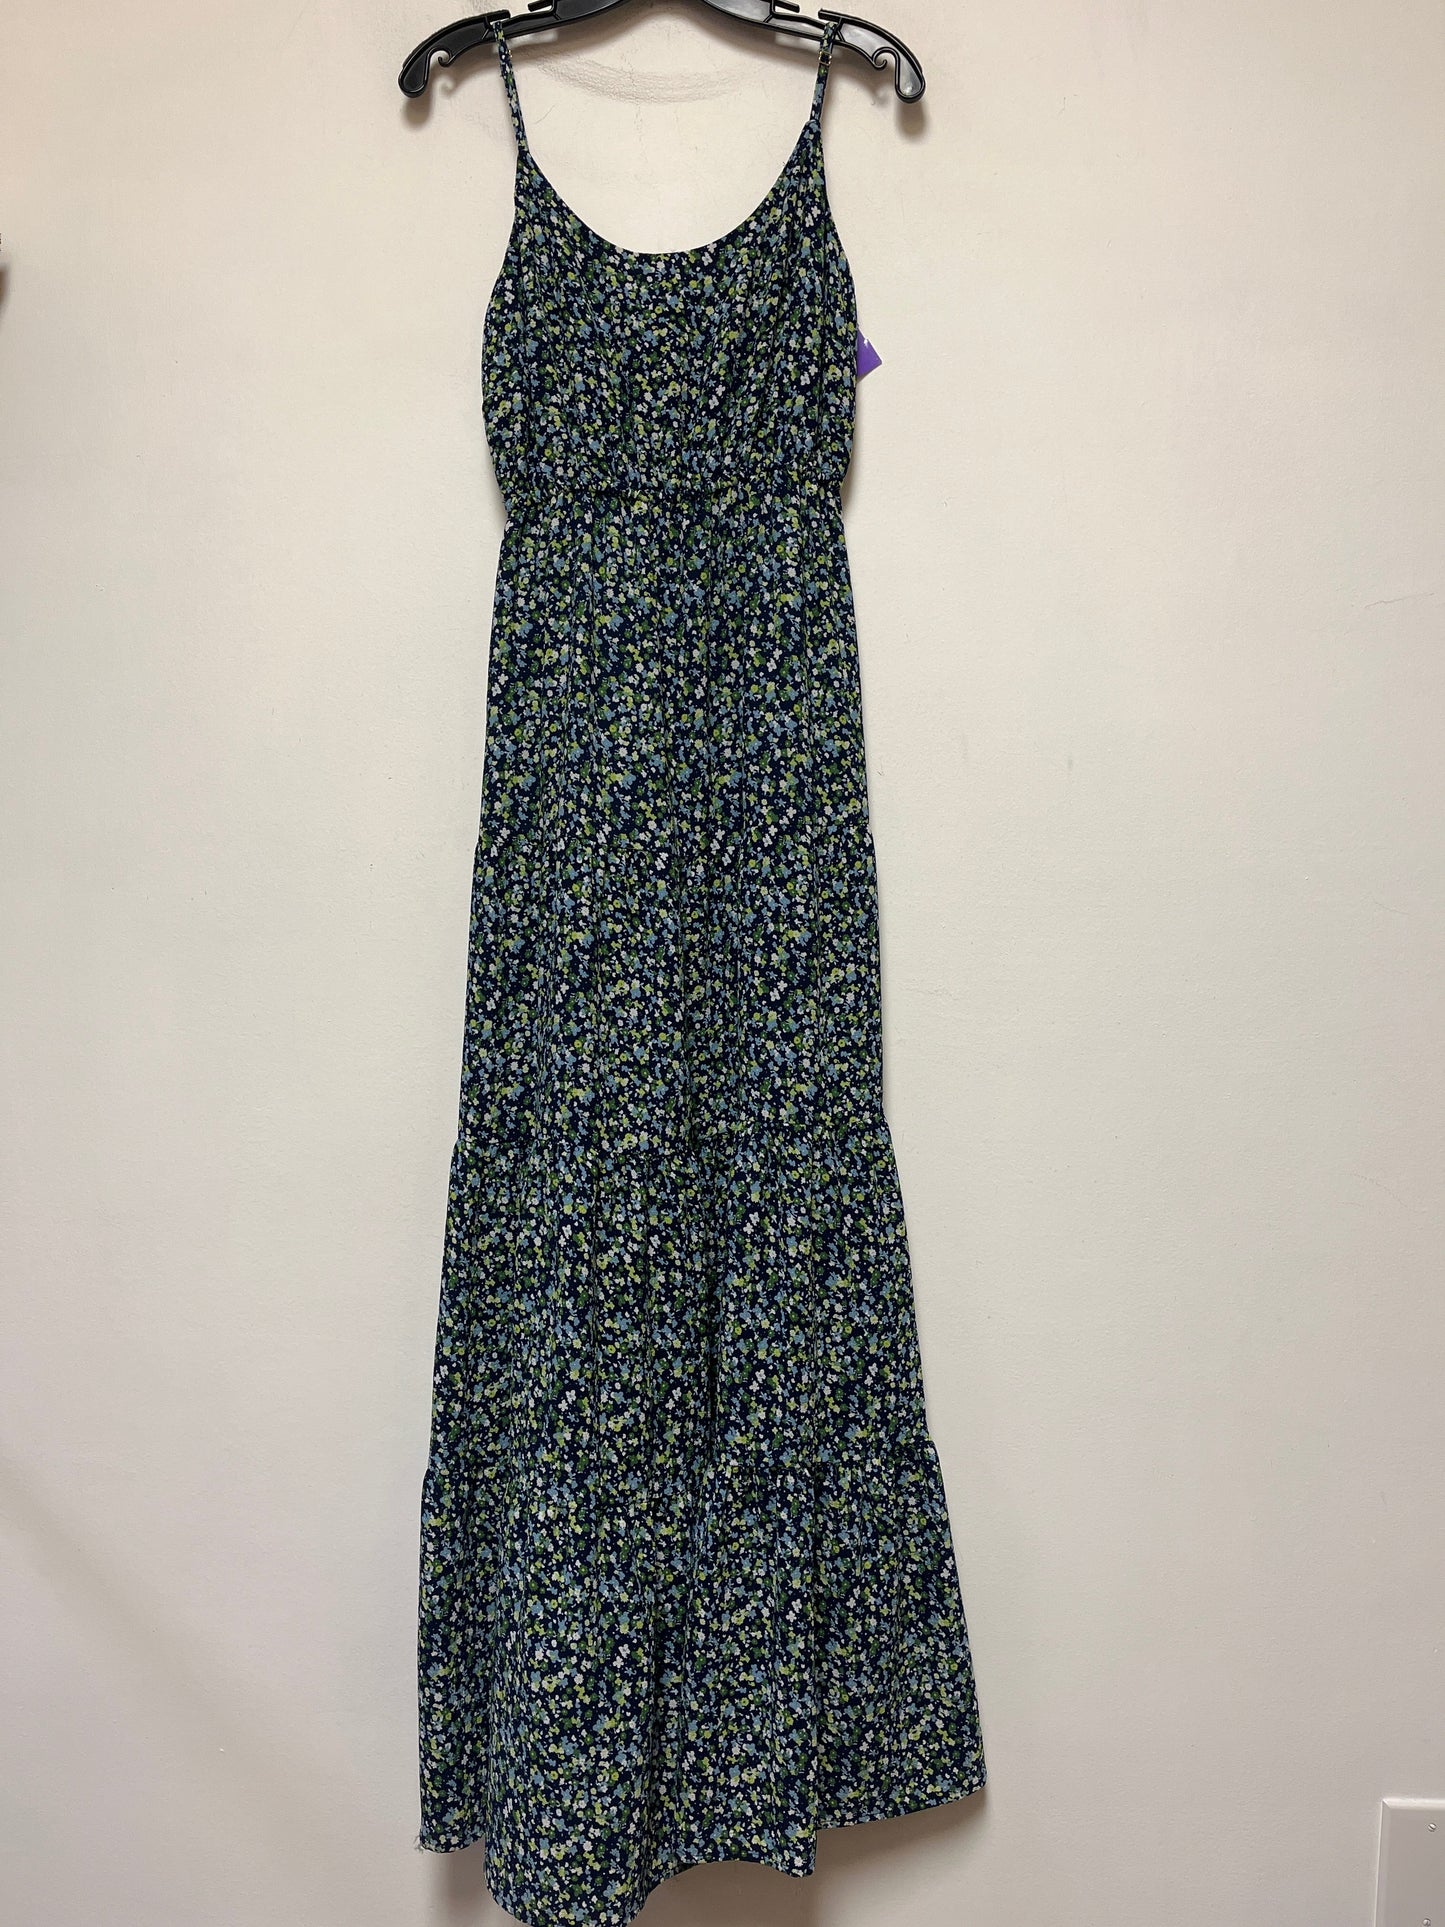 Floral Print Dress Casual Maxi Michael By Michael Kors, Size S